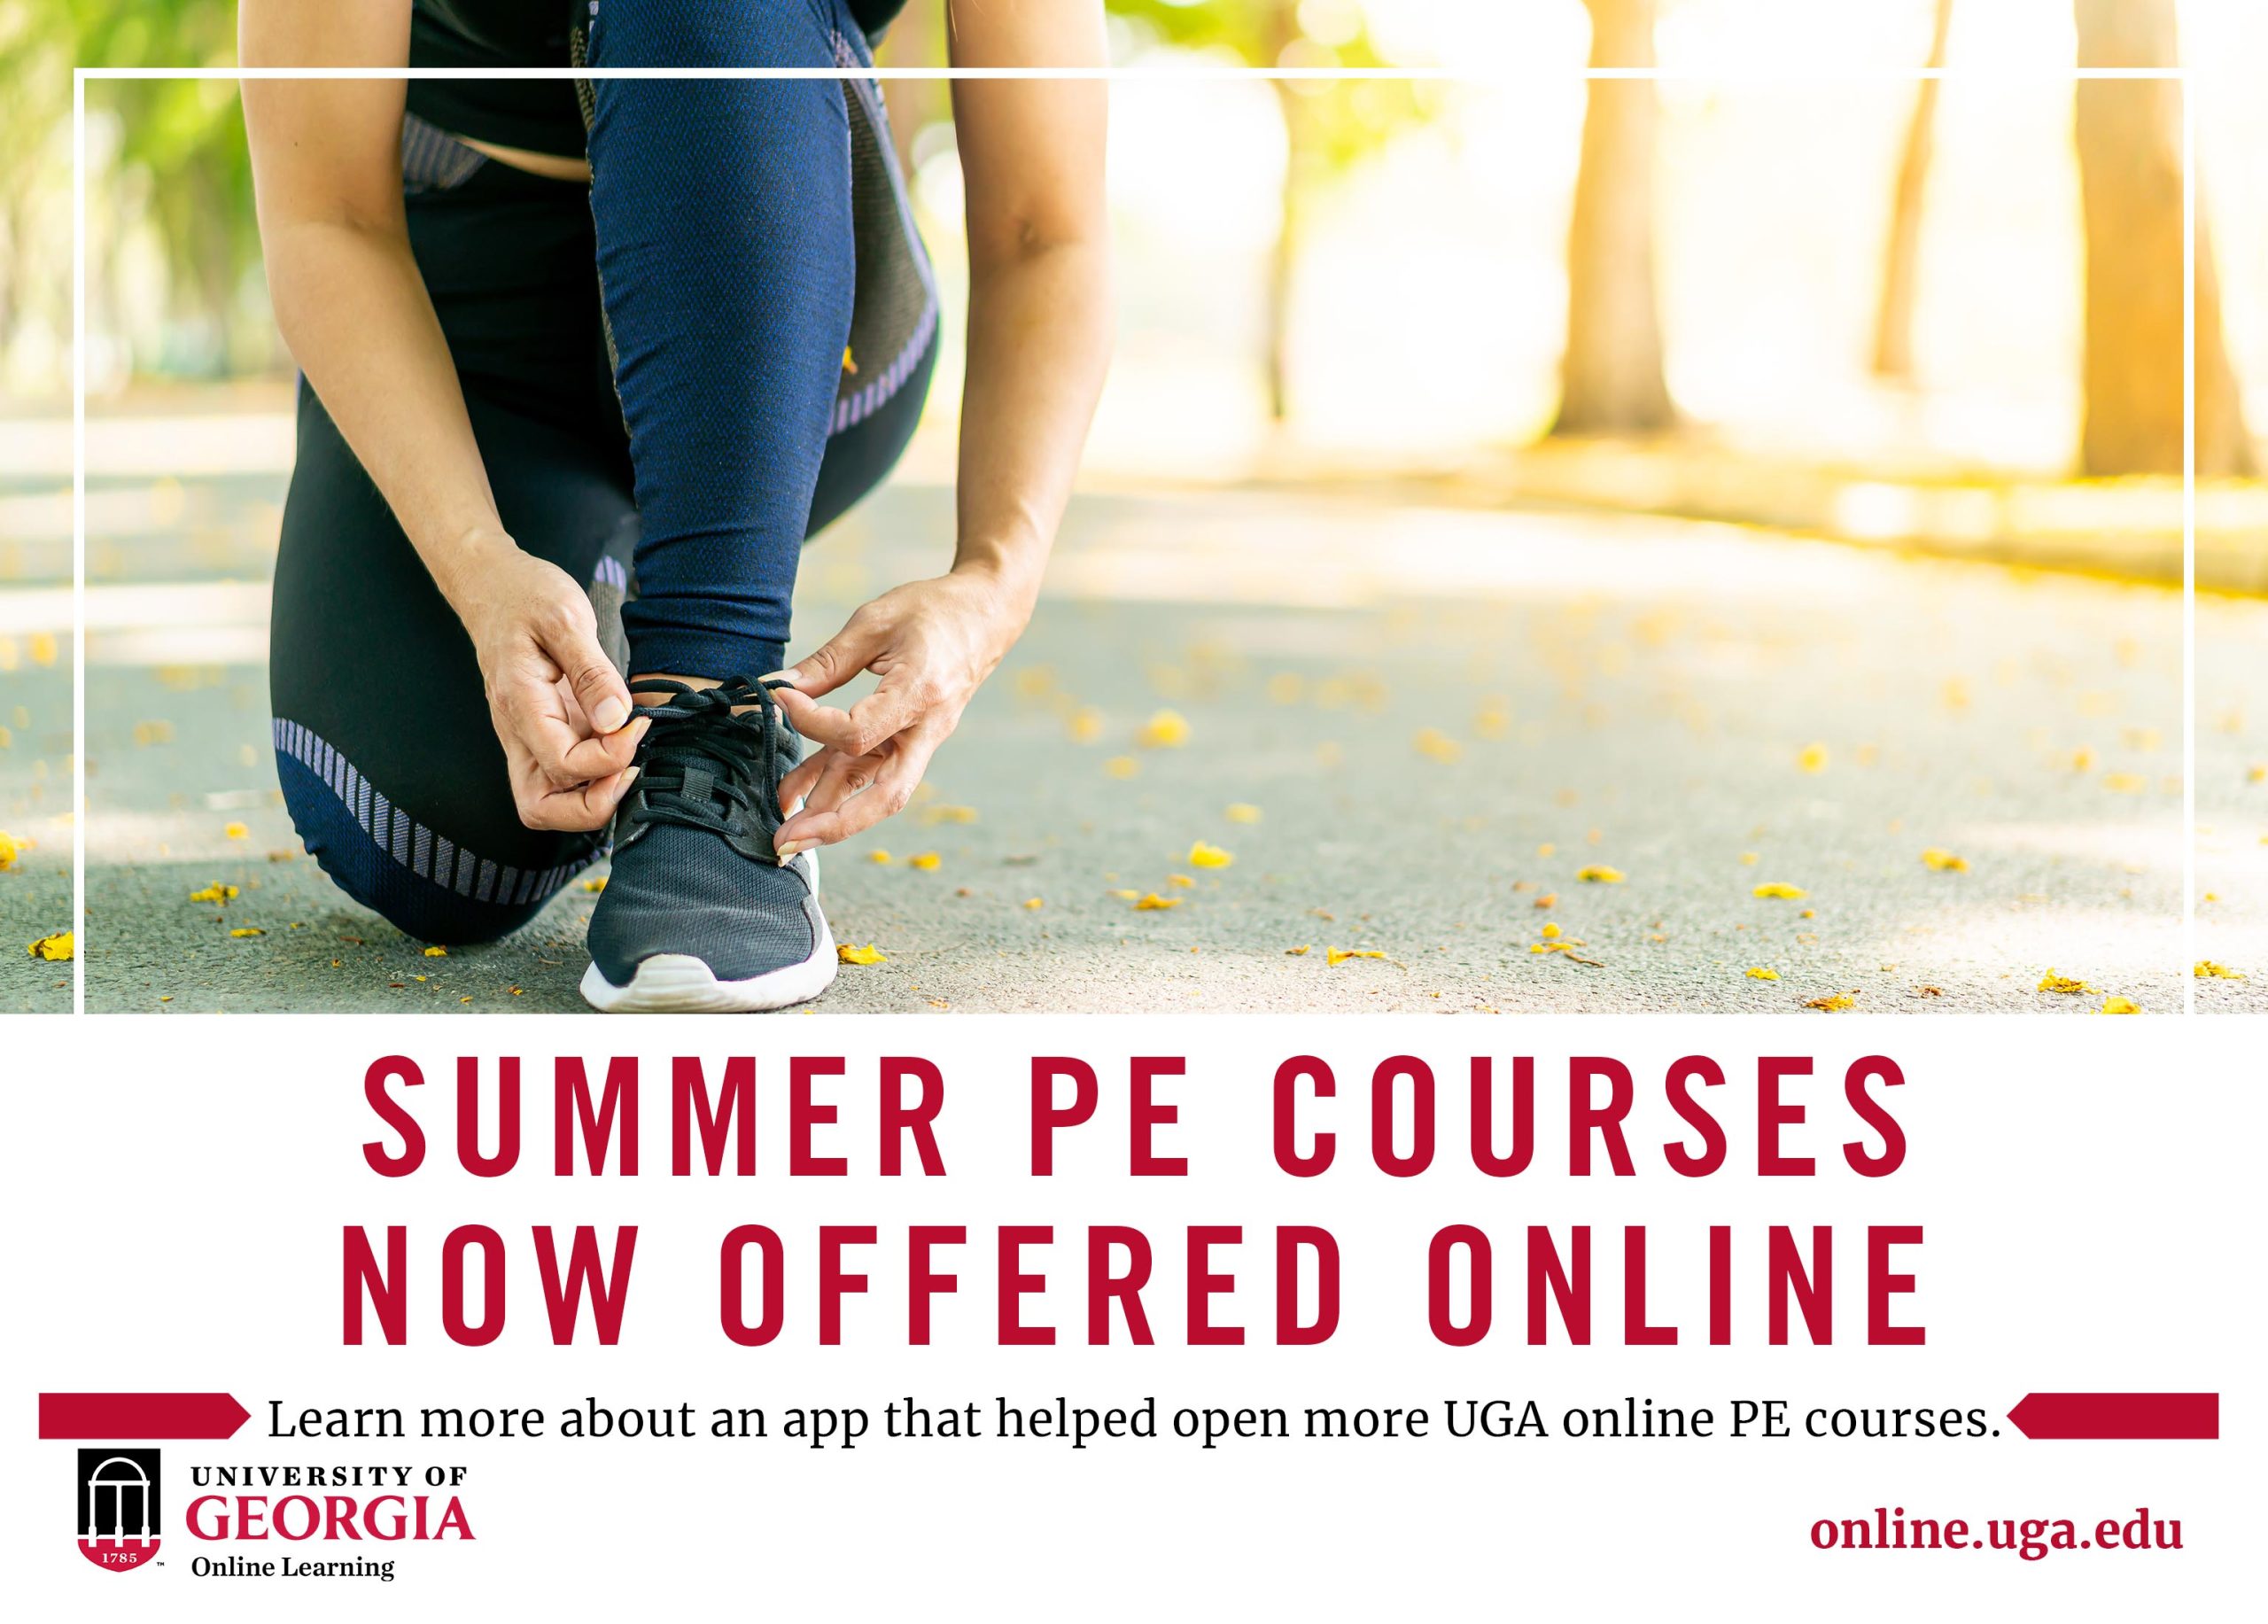 Expanded App Helps Open More UGA Online PE courses UGA Online